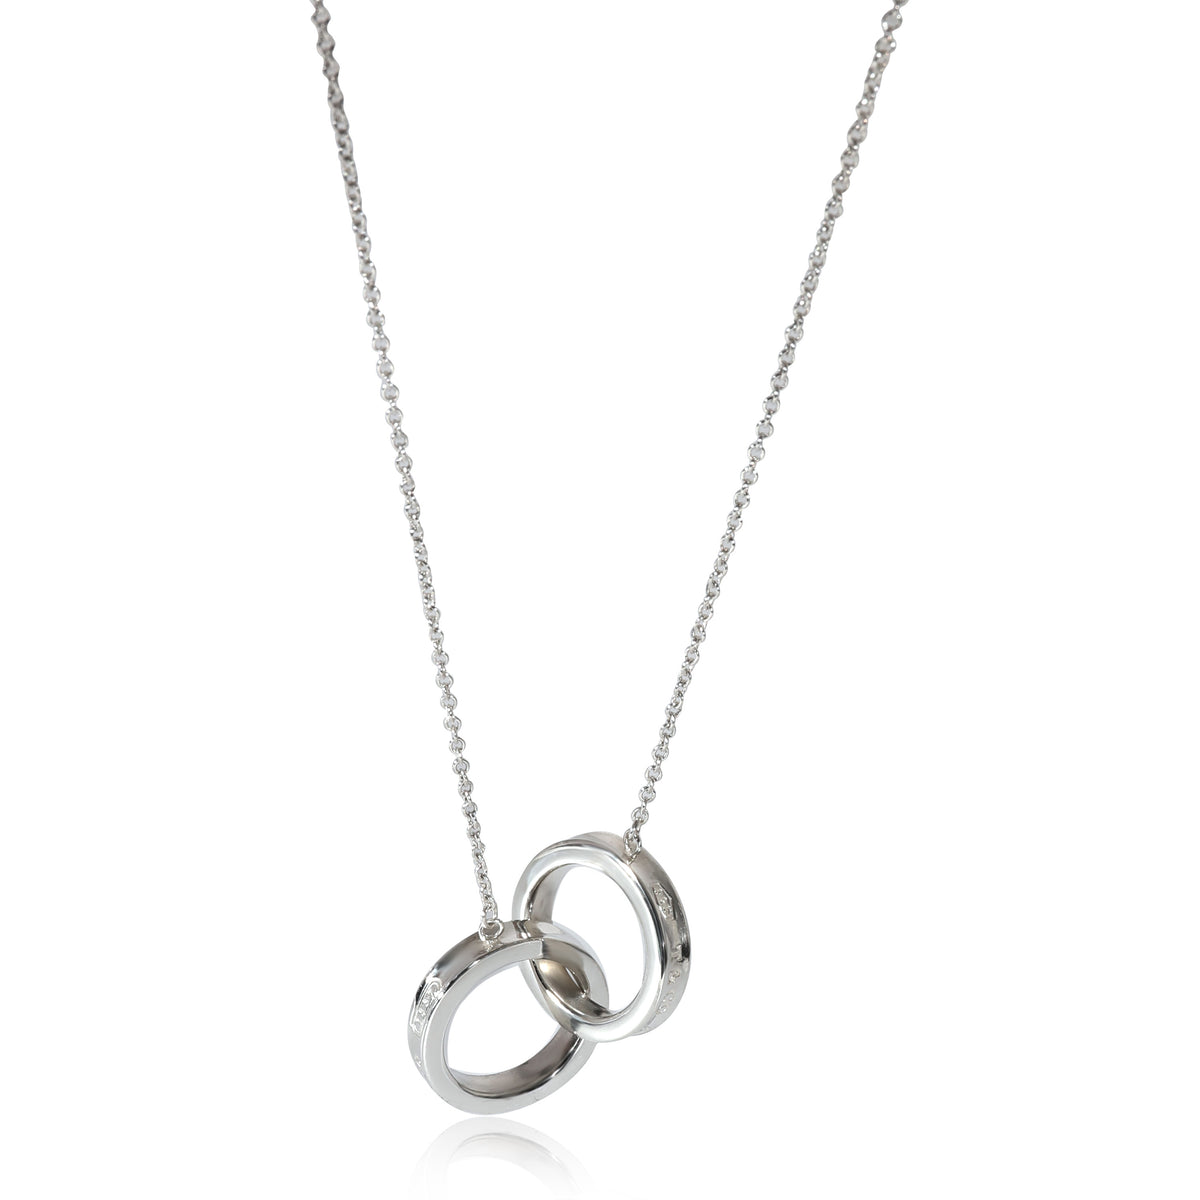 Tiffany & Co. 1837 Interlocking Necklace in  Sterling Silver